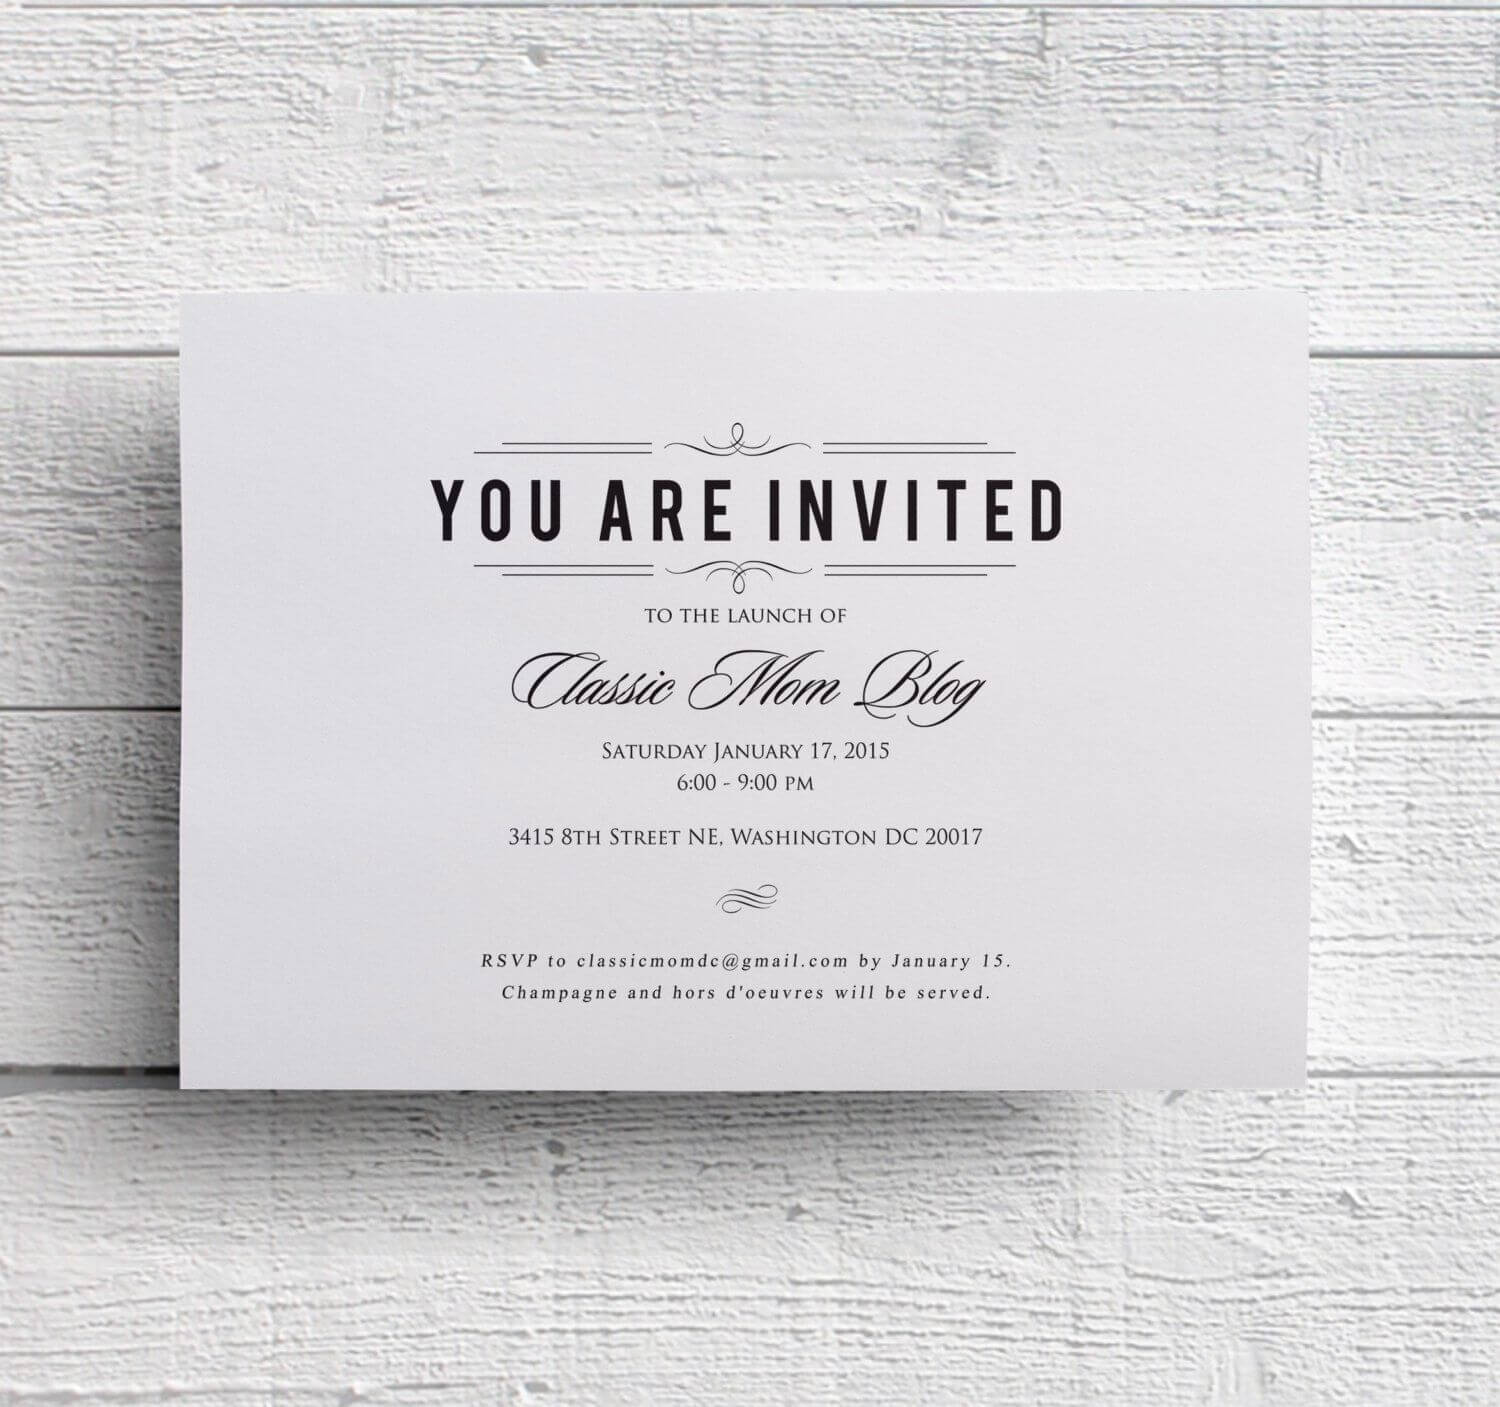 002 Corporate Event Invitation Template Magnificent Ideas Intended For Business Launch Invitation Templates Free